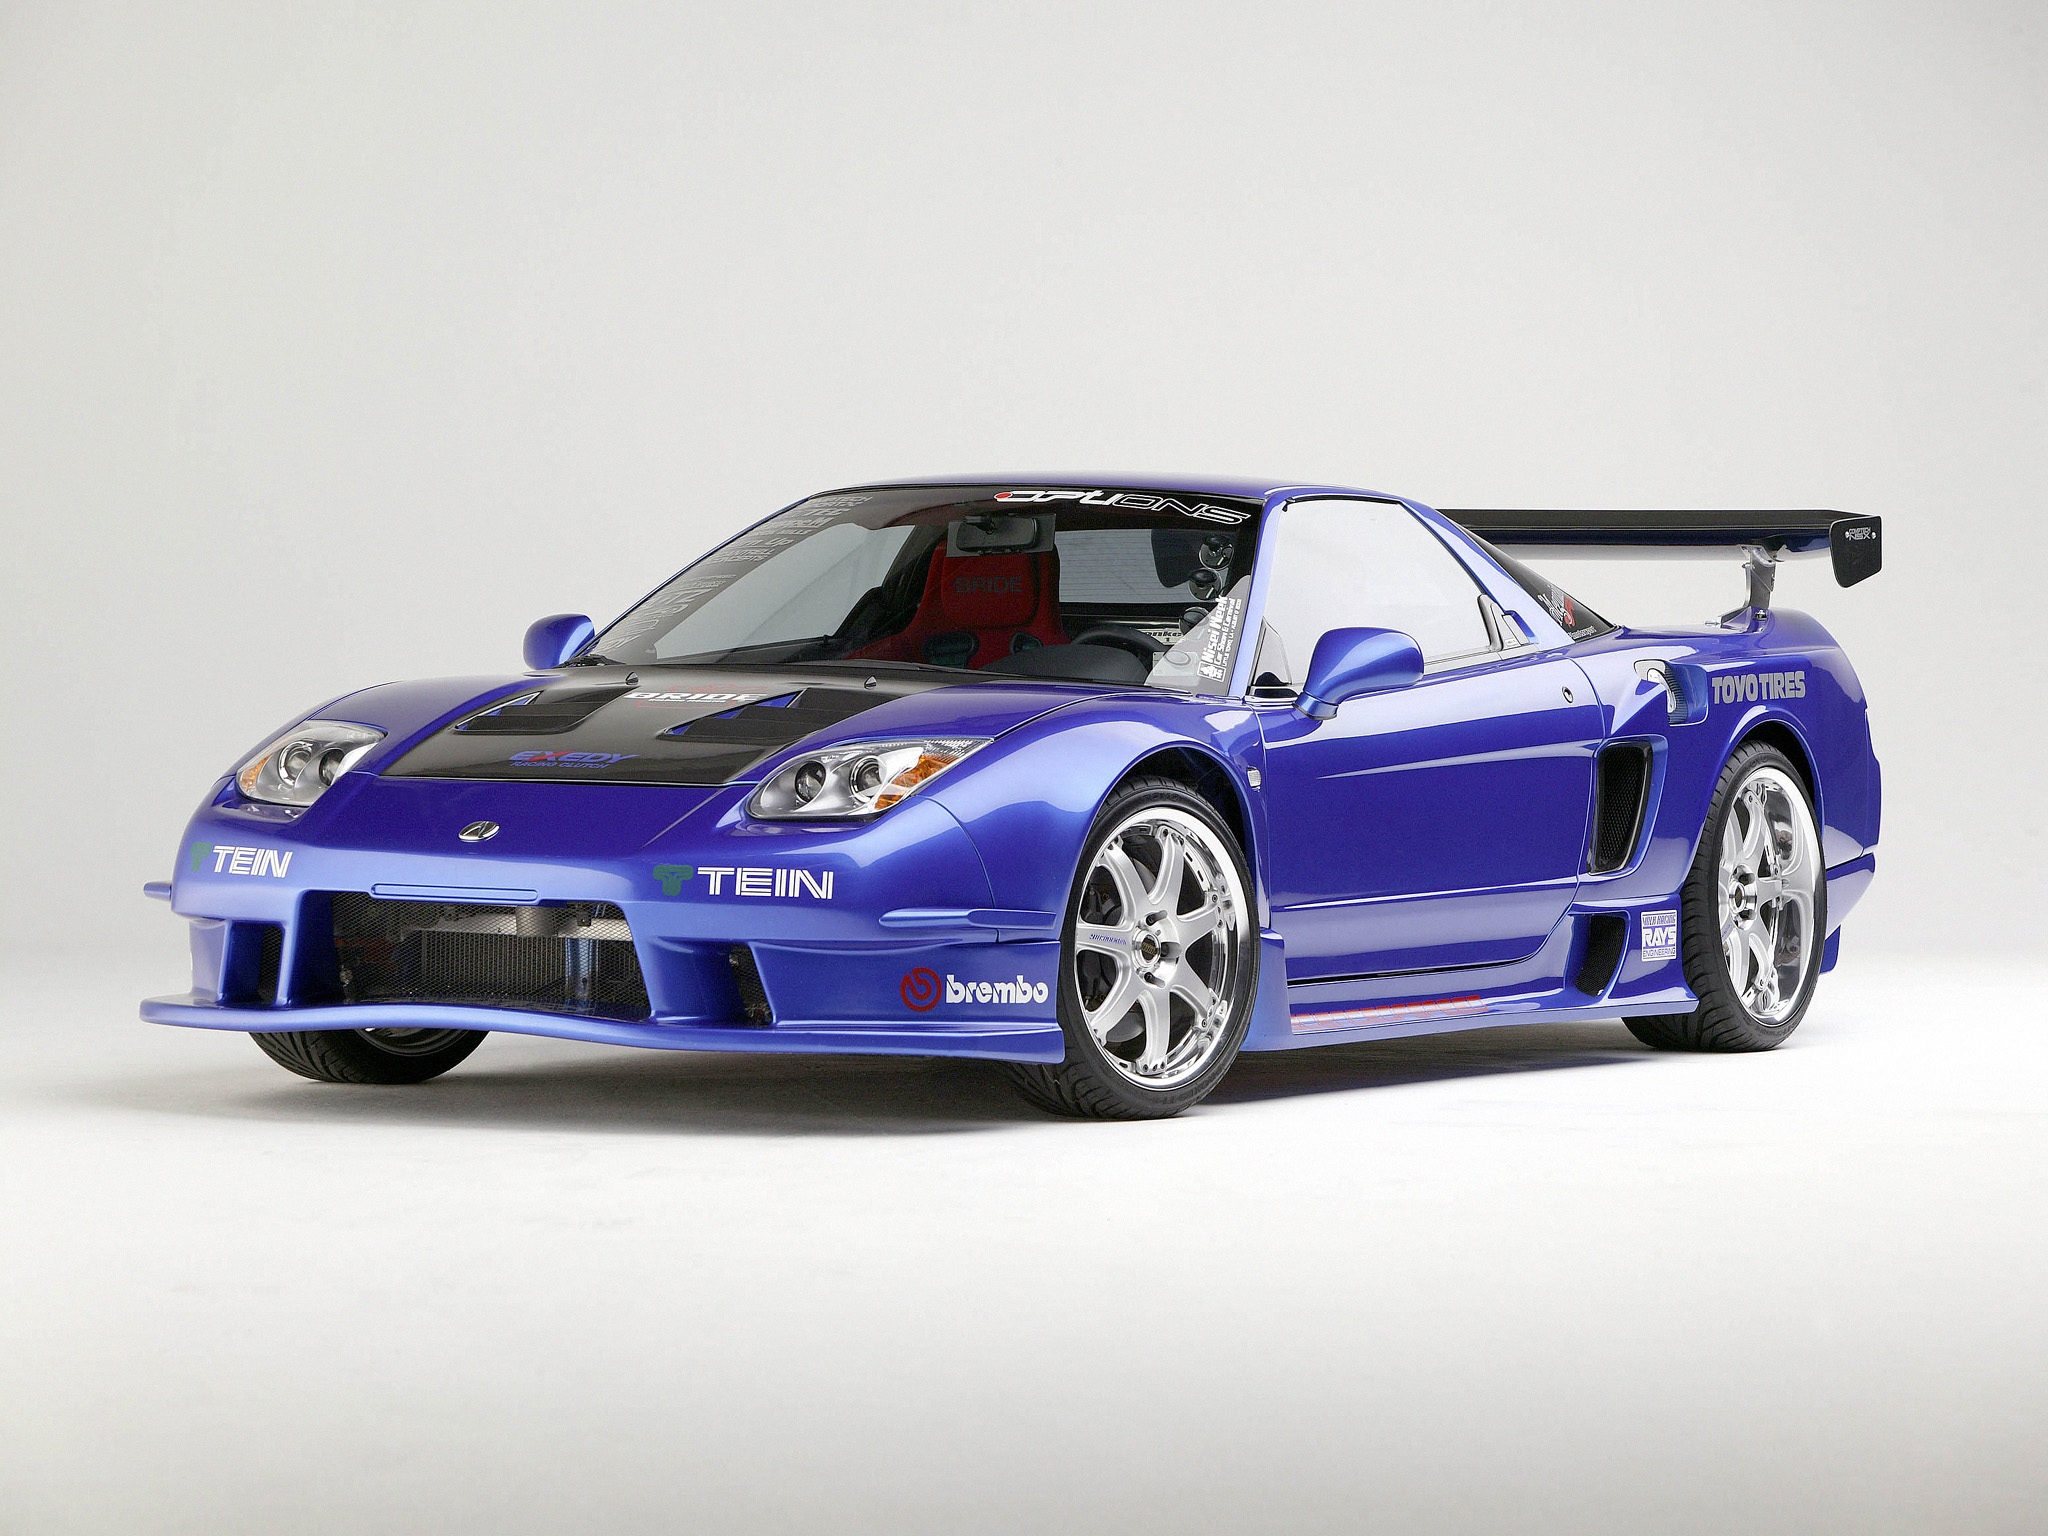 sports, auto, acura, cars, blue, front view, style, akura, 2003, nsx, hsx, nsh